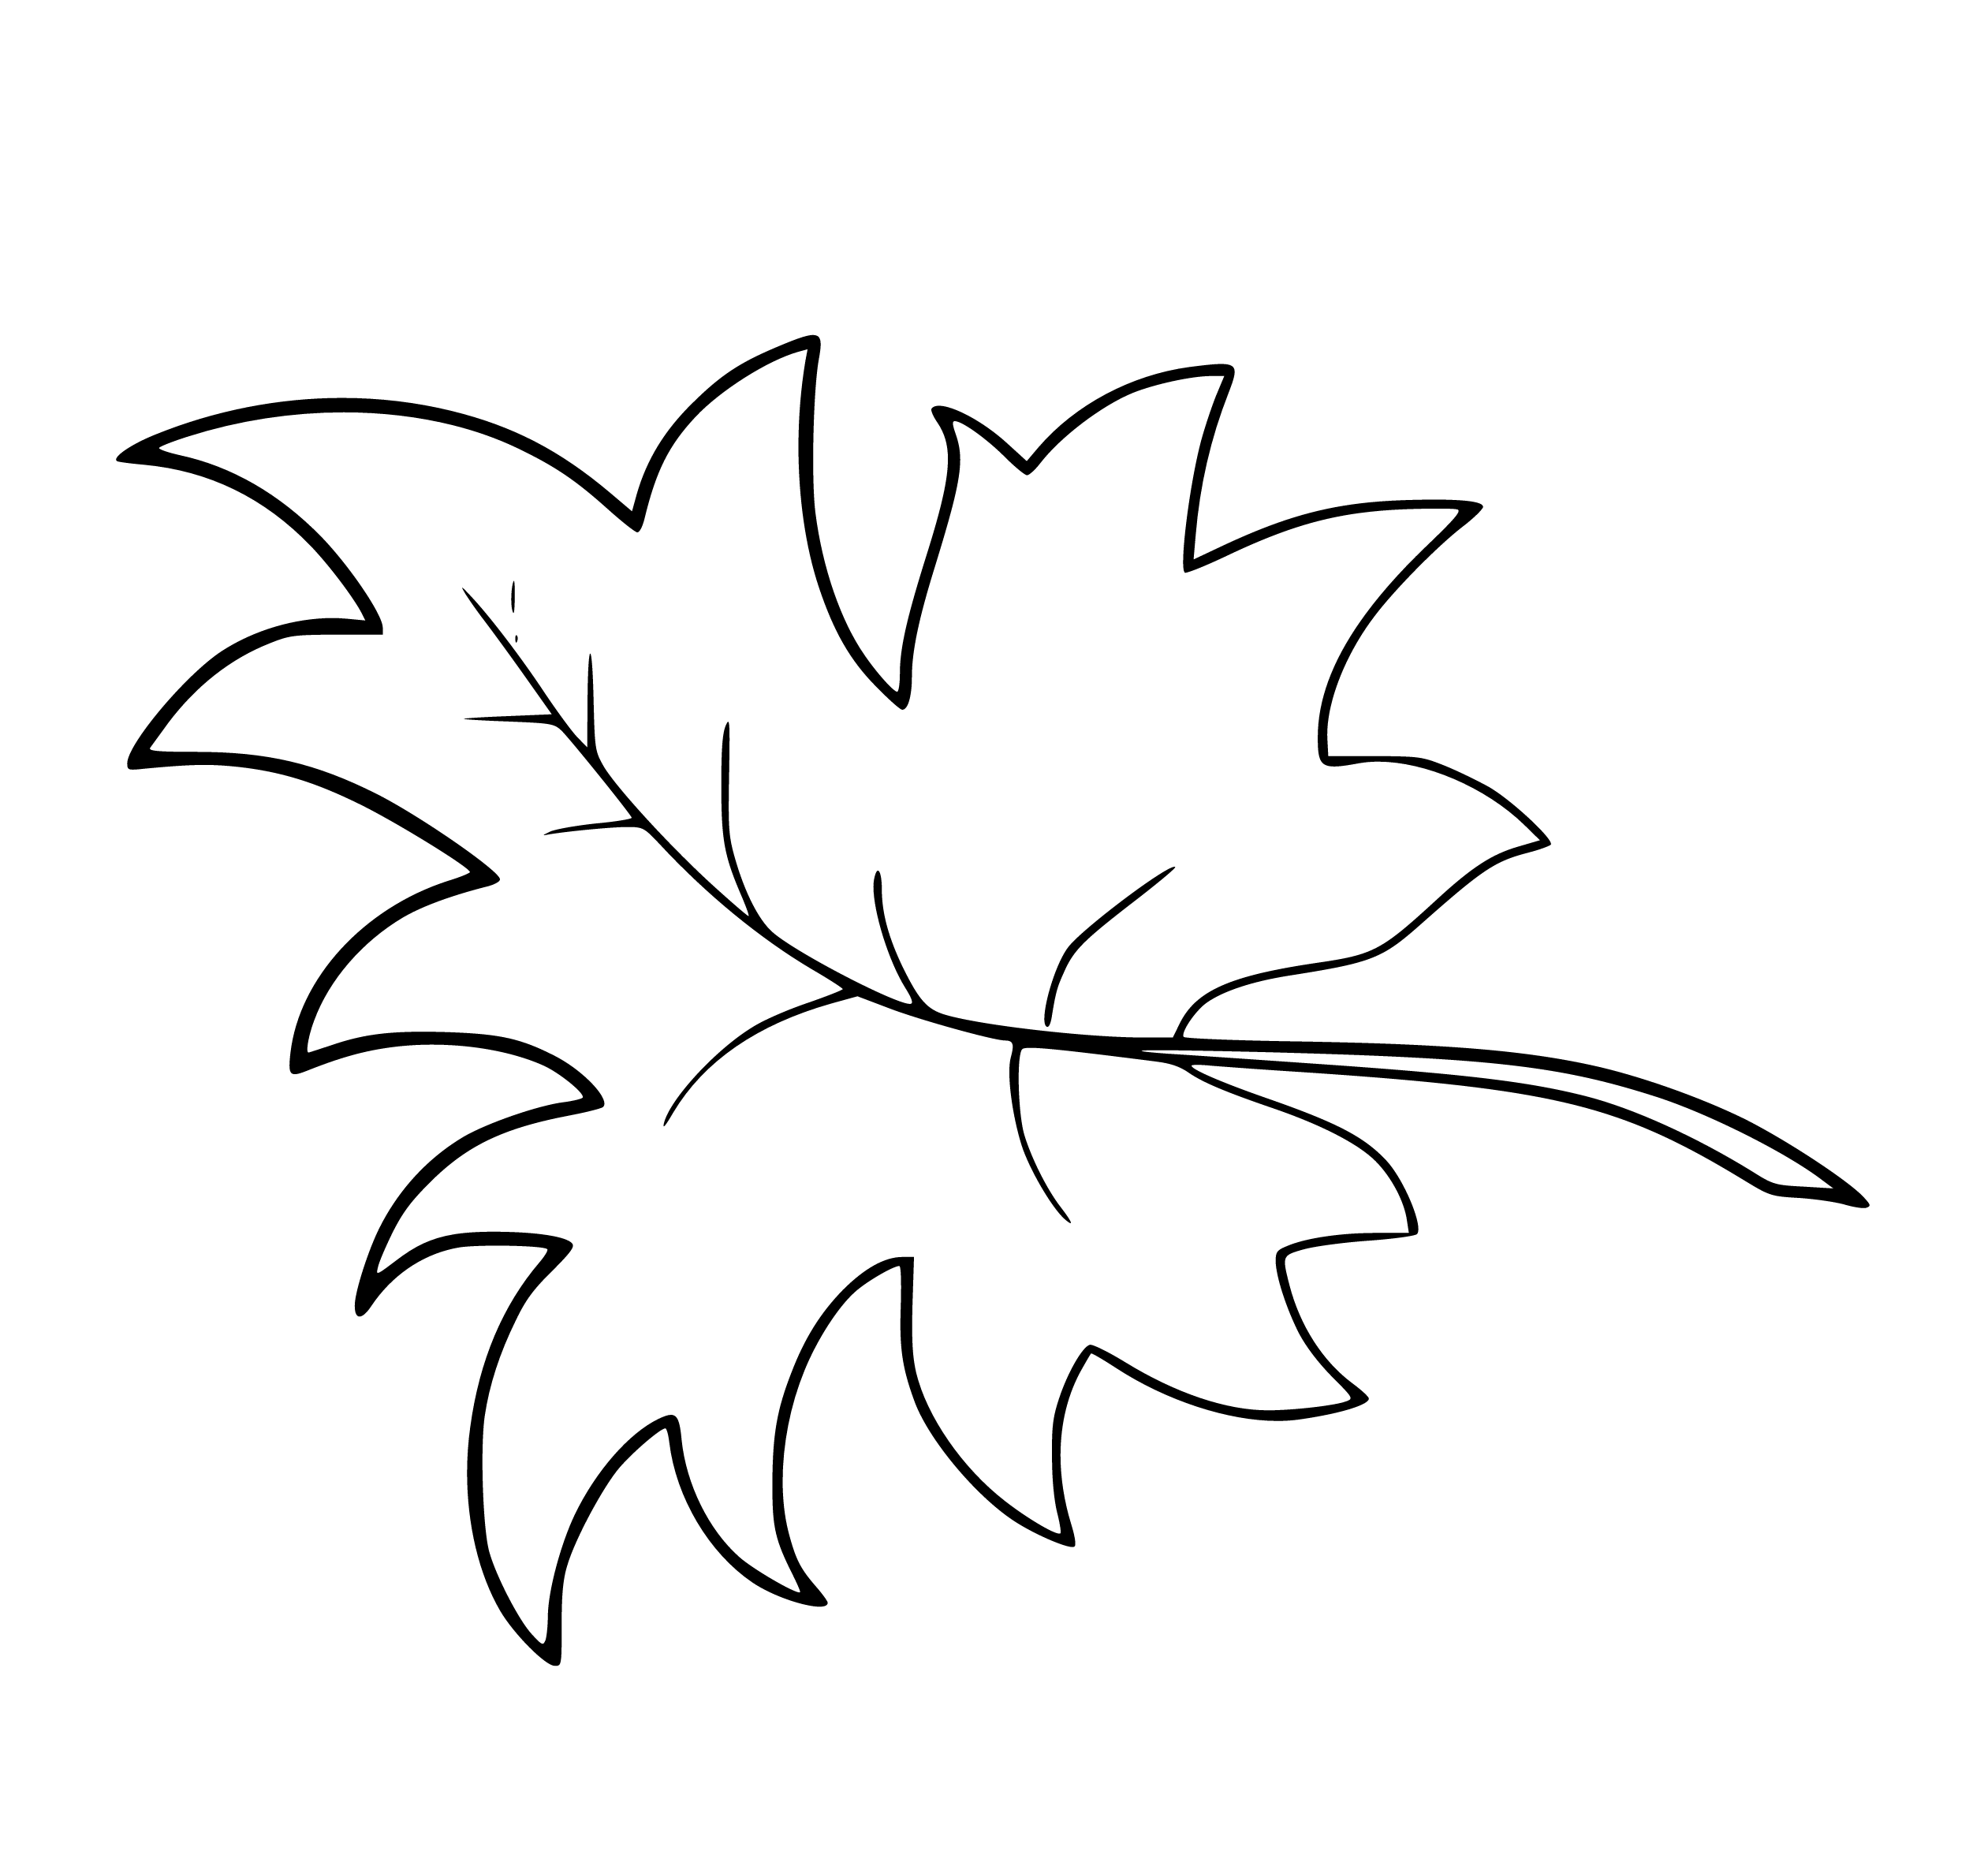 Printable Maple's Leaf Coloring Page for kids.